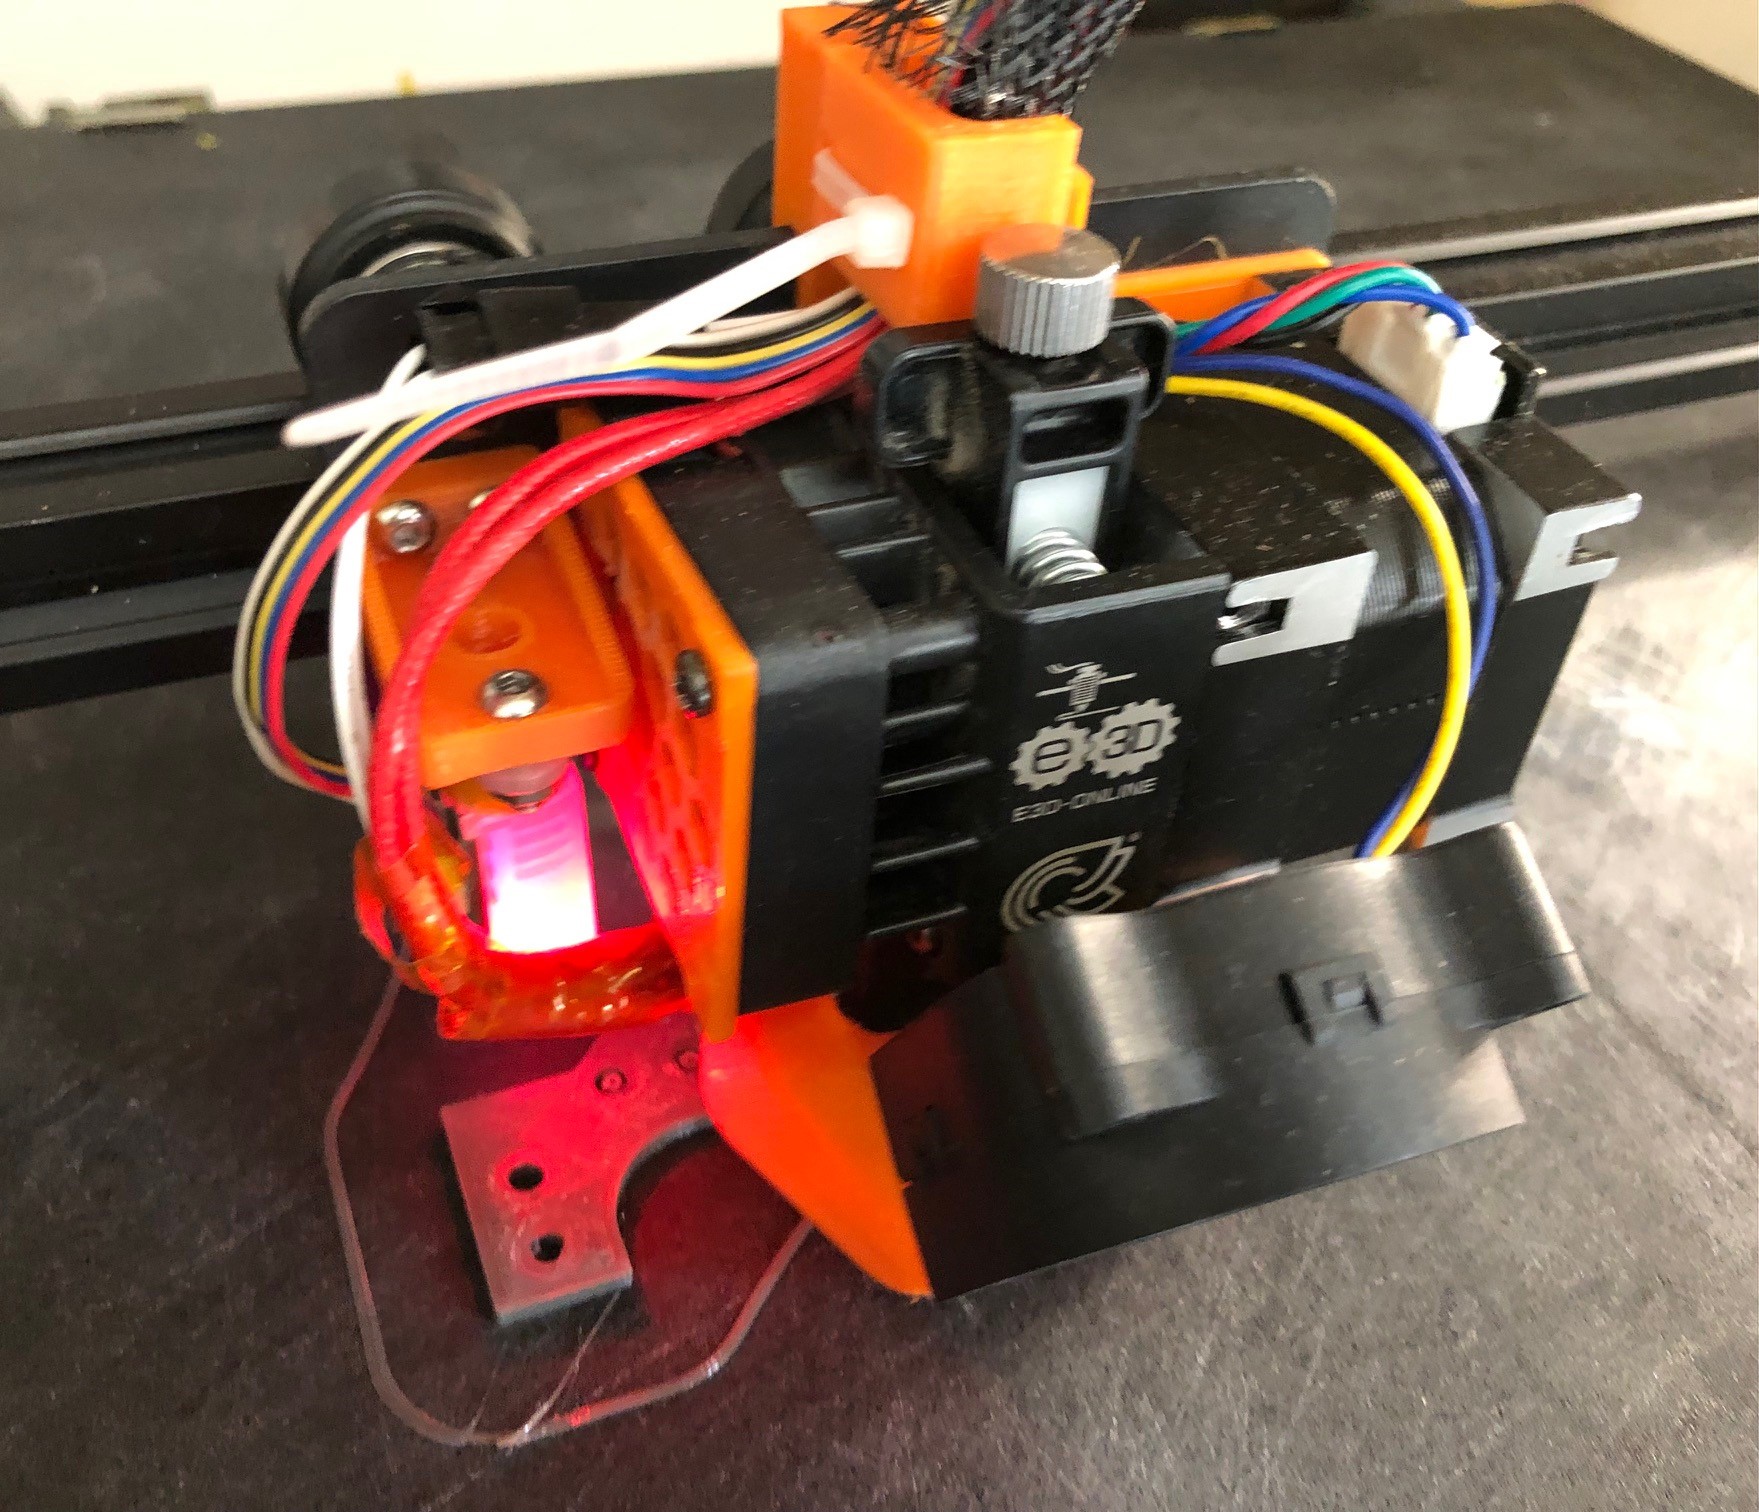 Hemera mount for 2020 extrusion (e.g. Ender 3, CR-10s Pro or CR-10 Max) - requires metal plate - minimal invasive